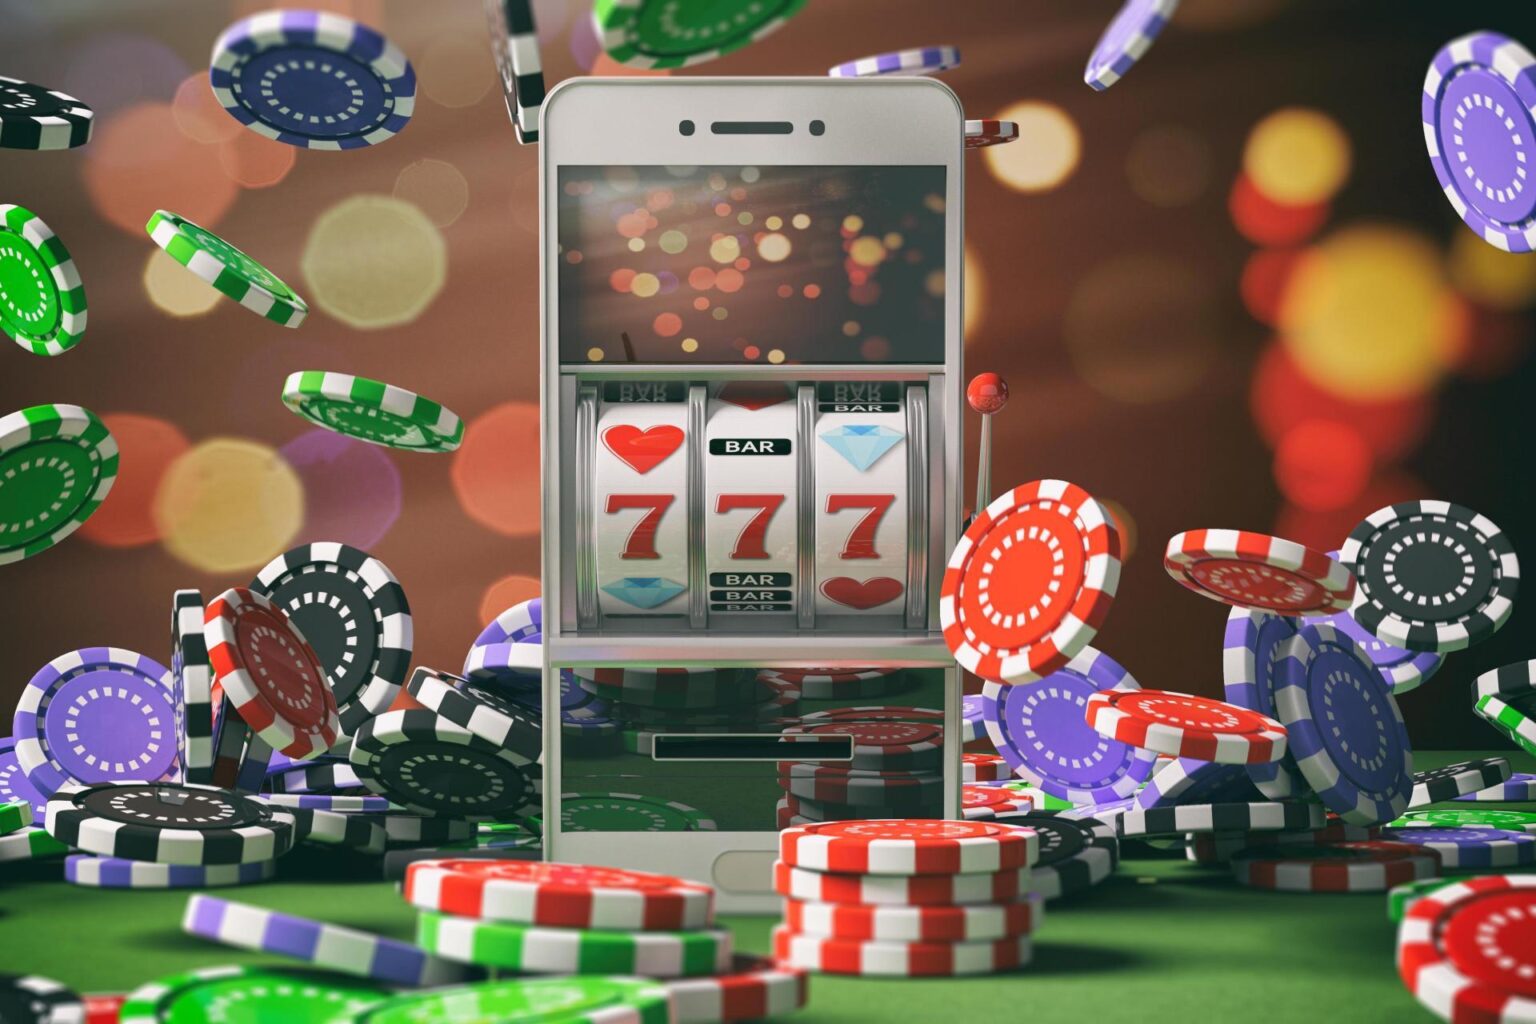 What online casino games have a high chance of winning and will help you multiply your bet? Here are the games with the best odds.